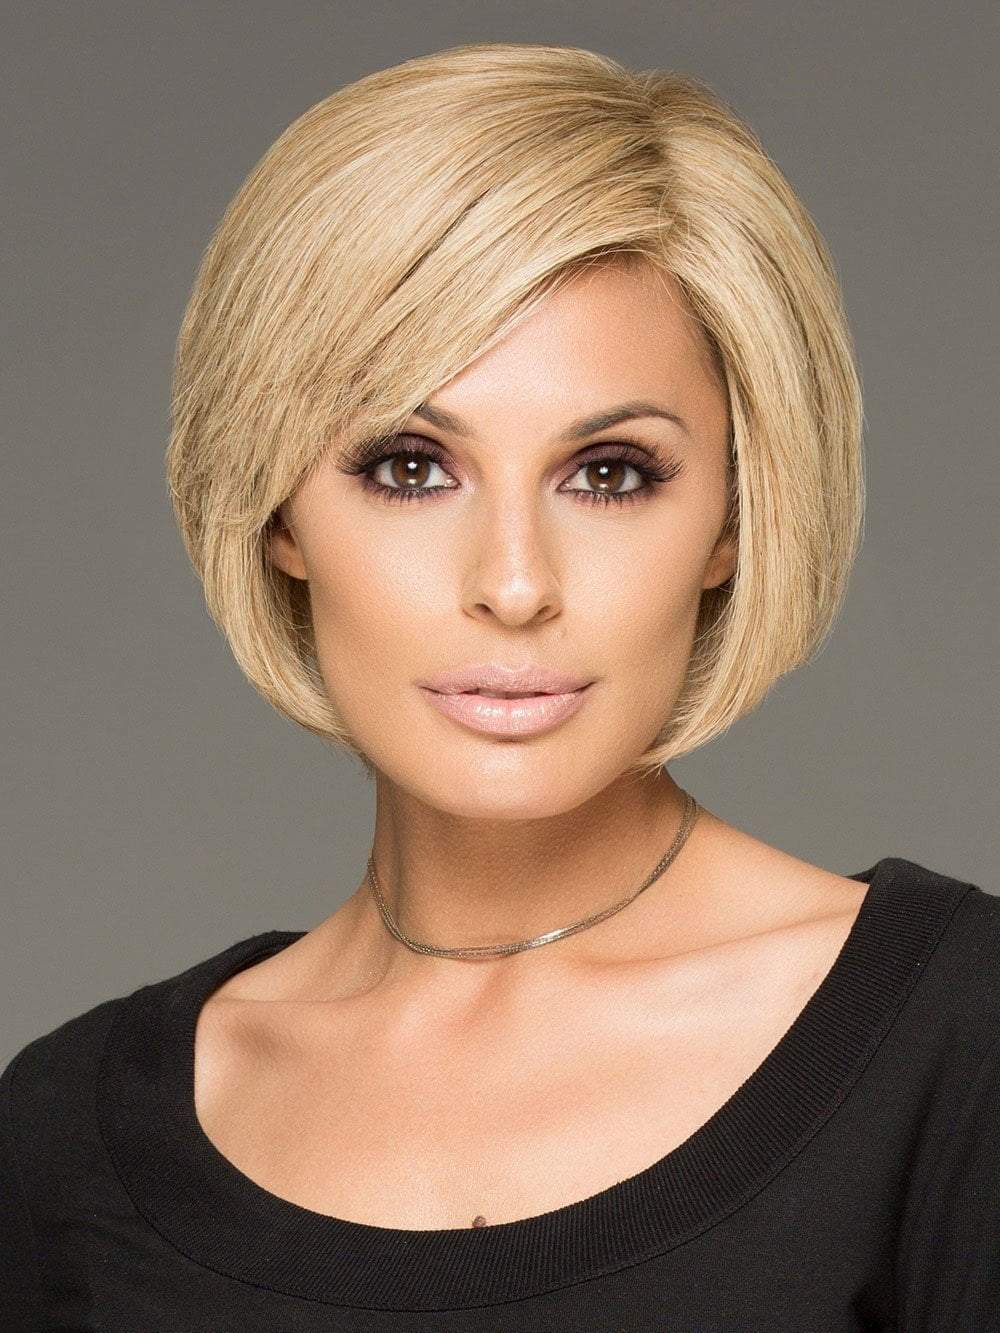 Raquel Welch Success Story is a short trendy wig, so chic! (This piece has been styled and straightened)